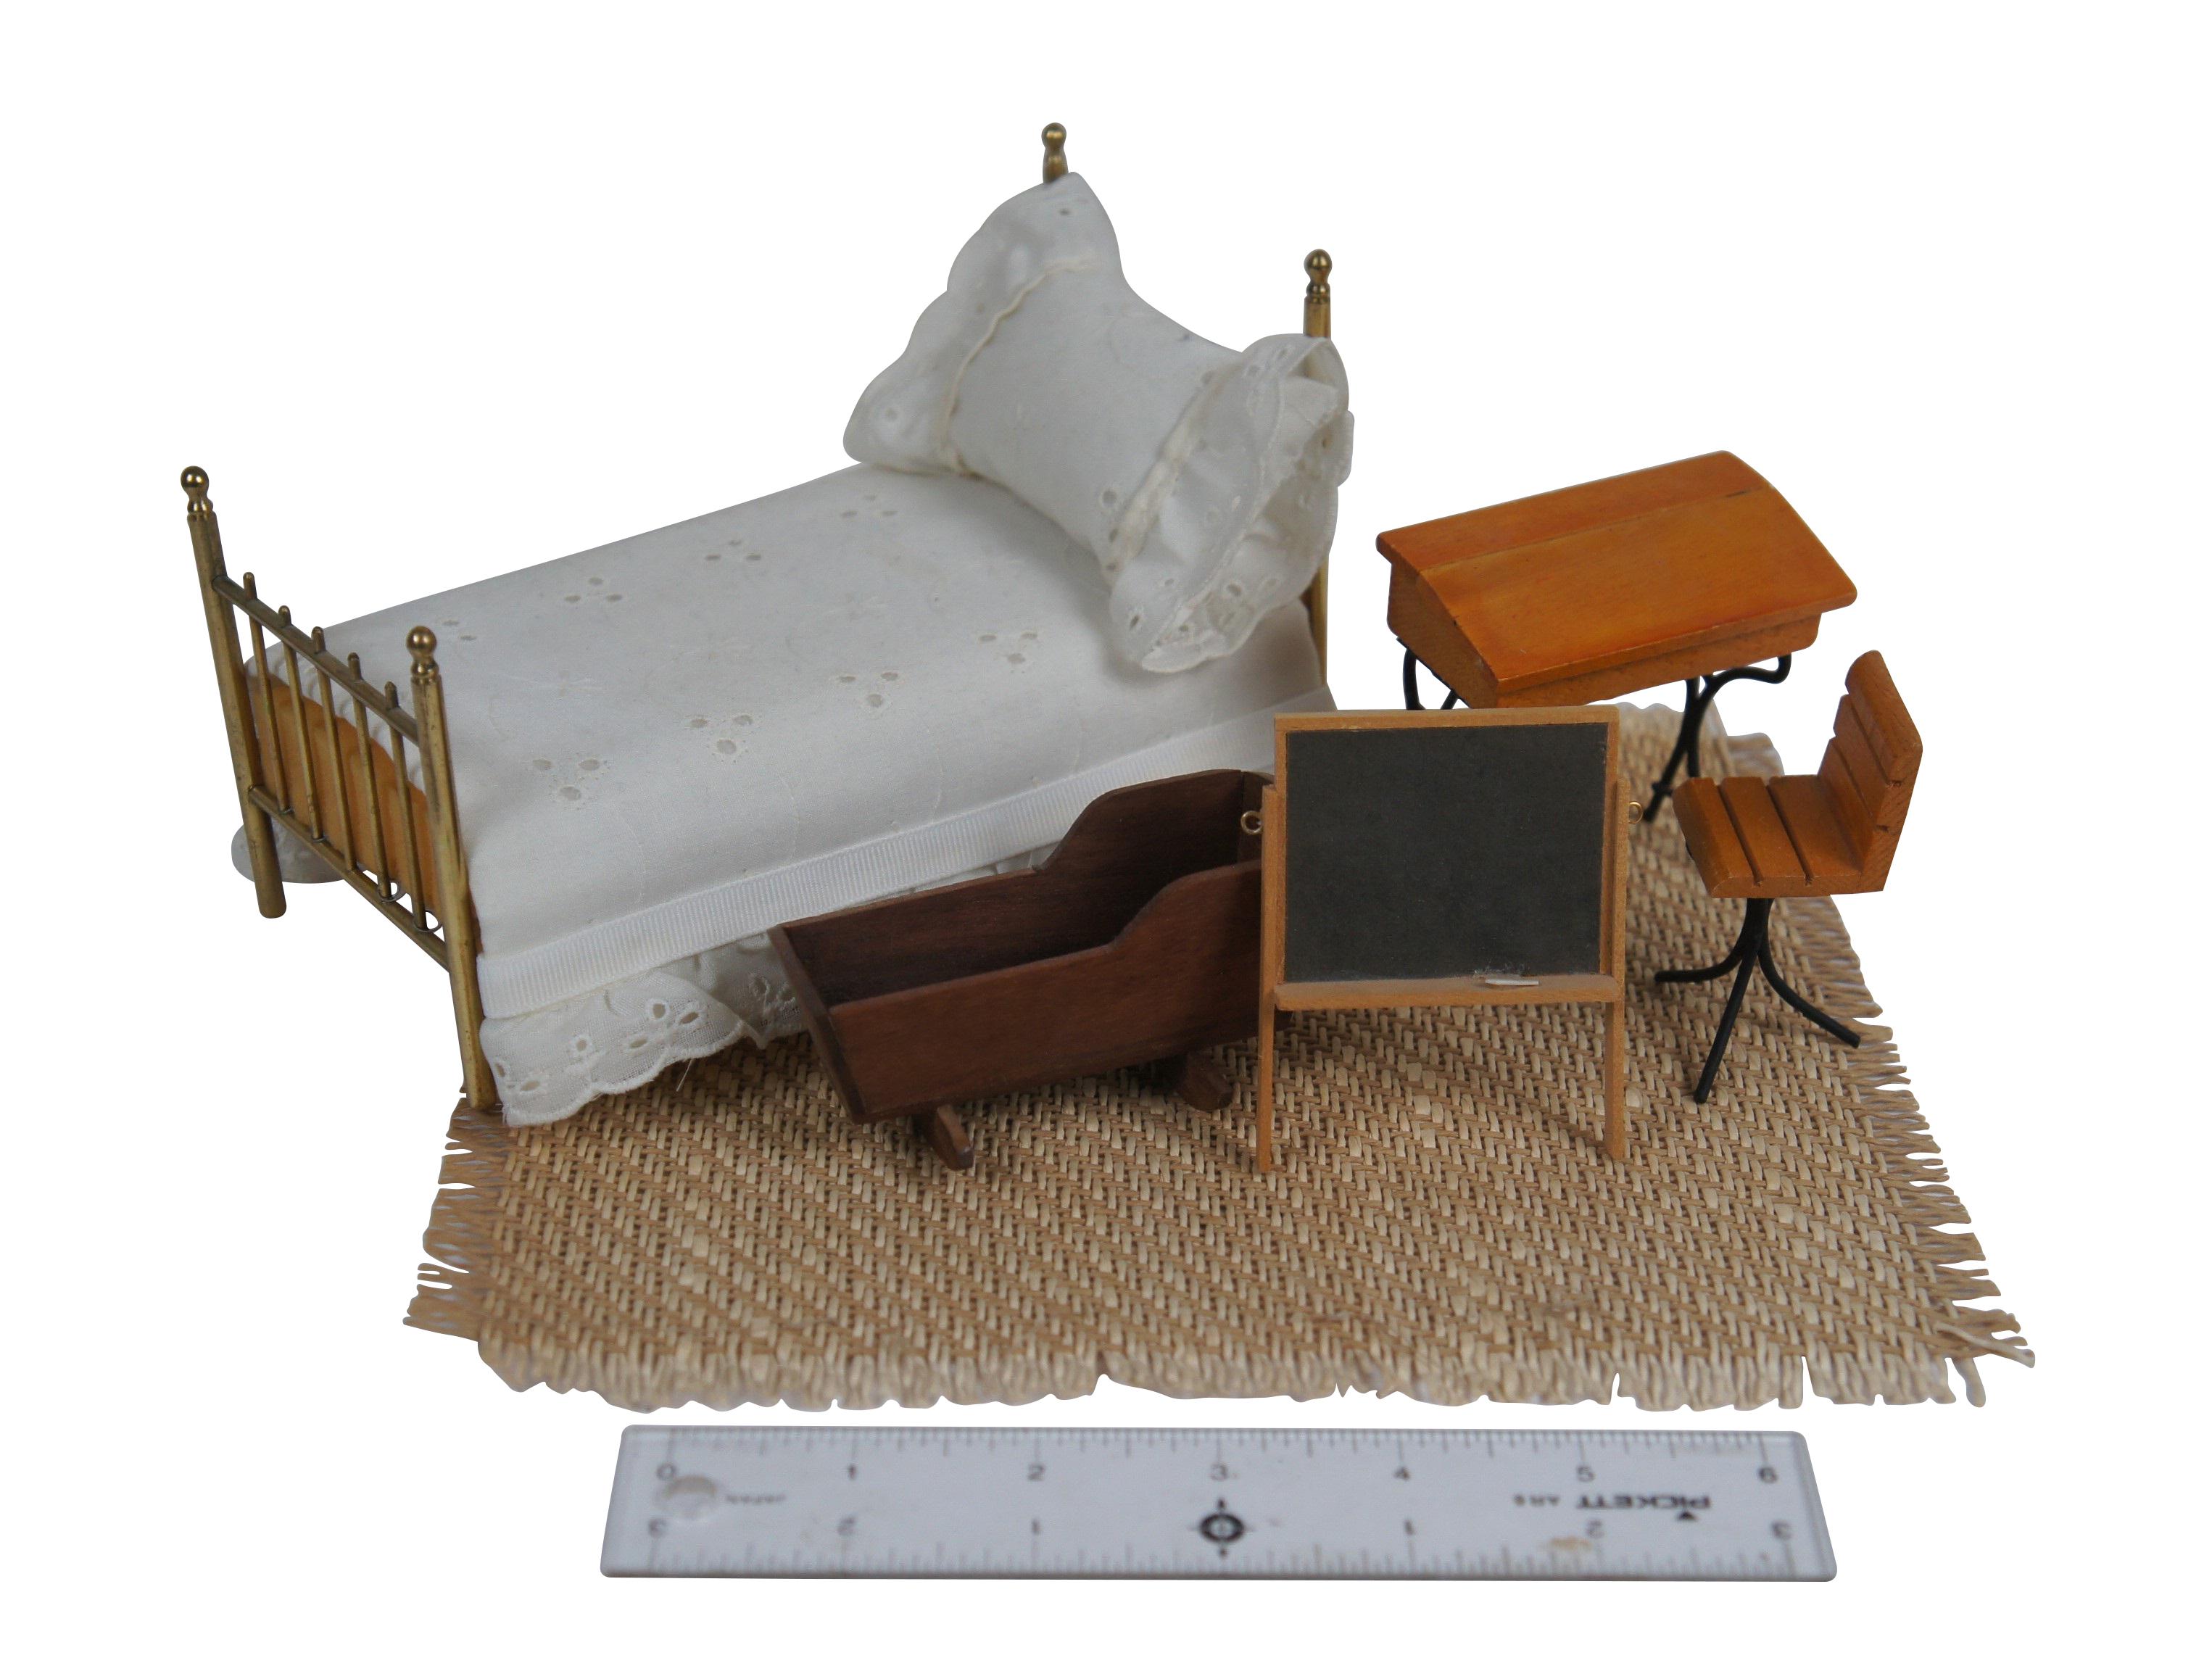 A large extensive / impressive lot of 334 pieces of dollhouse furniture and miniatures. Mixture of handmade and store bought / kit made items. Variety of materials and levels of wear.  Ruler shown for scale.

Lot includes: approximately 250 toys /